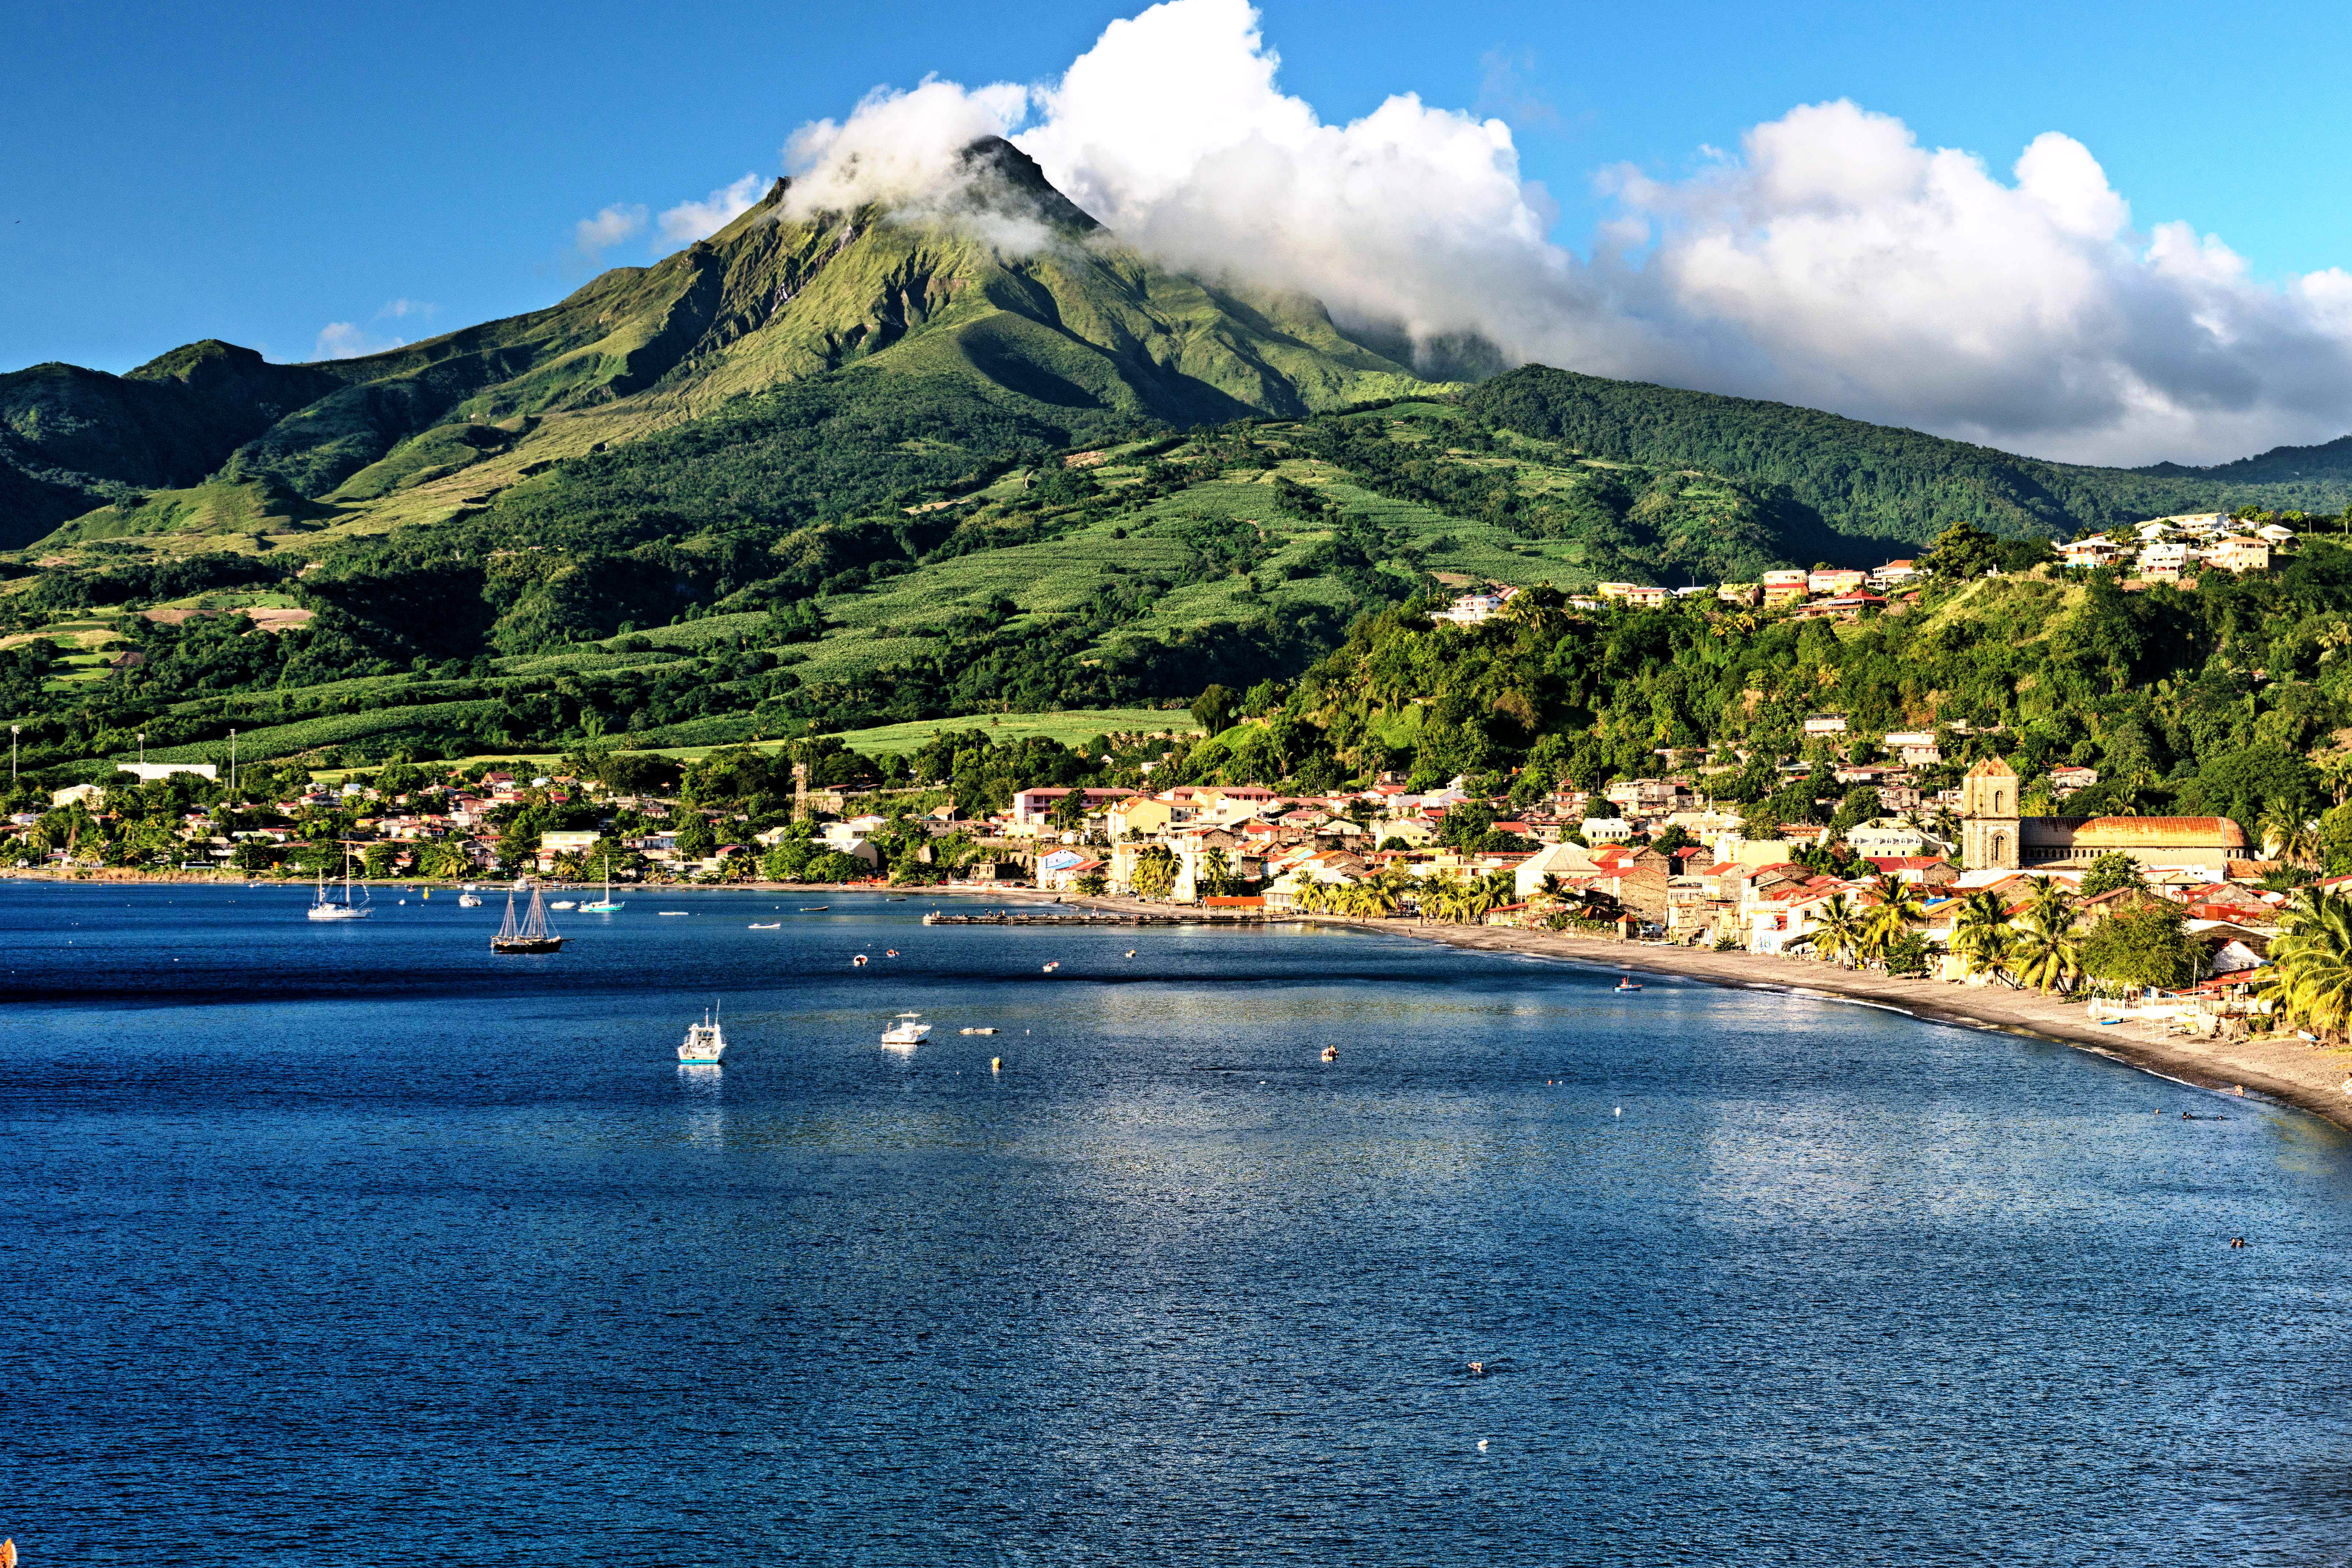 France in 5 hours: Go Gallic on the island of Martinique